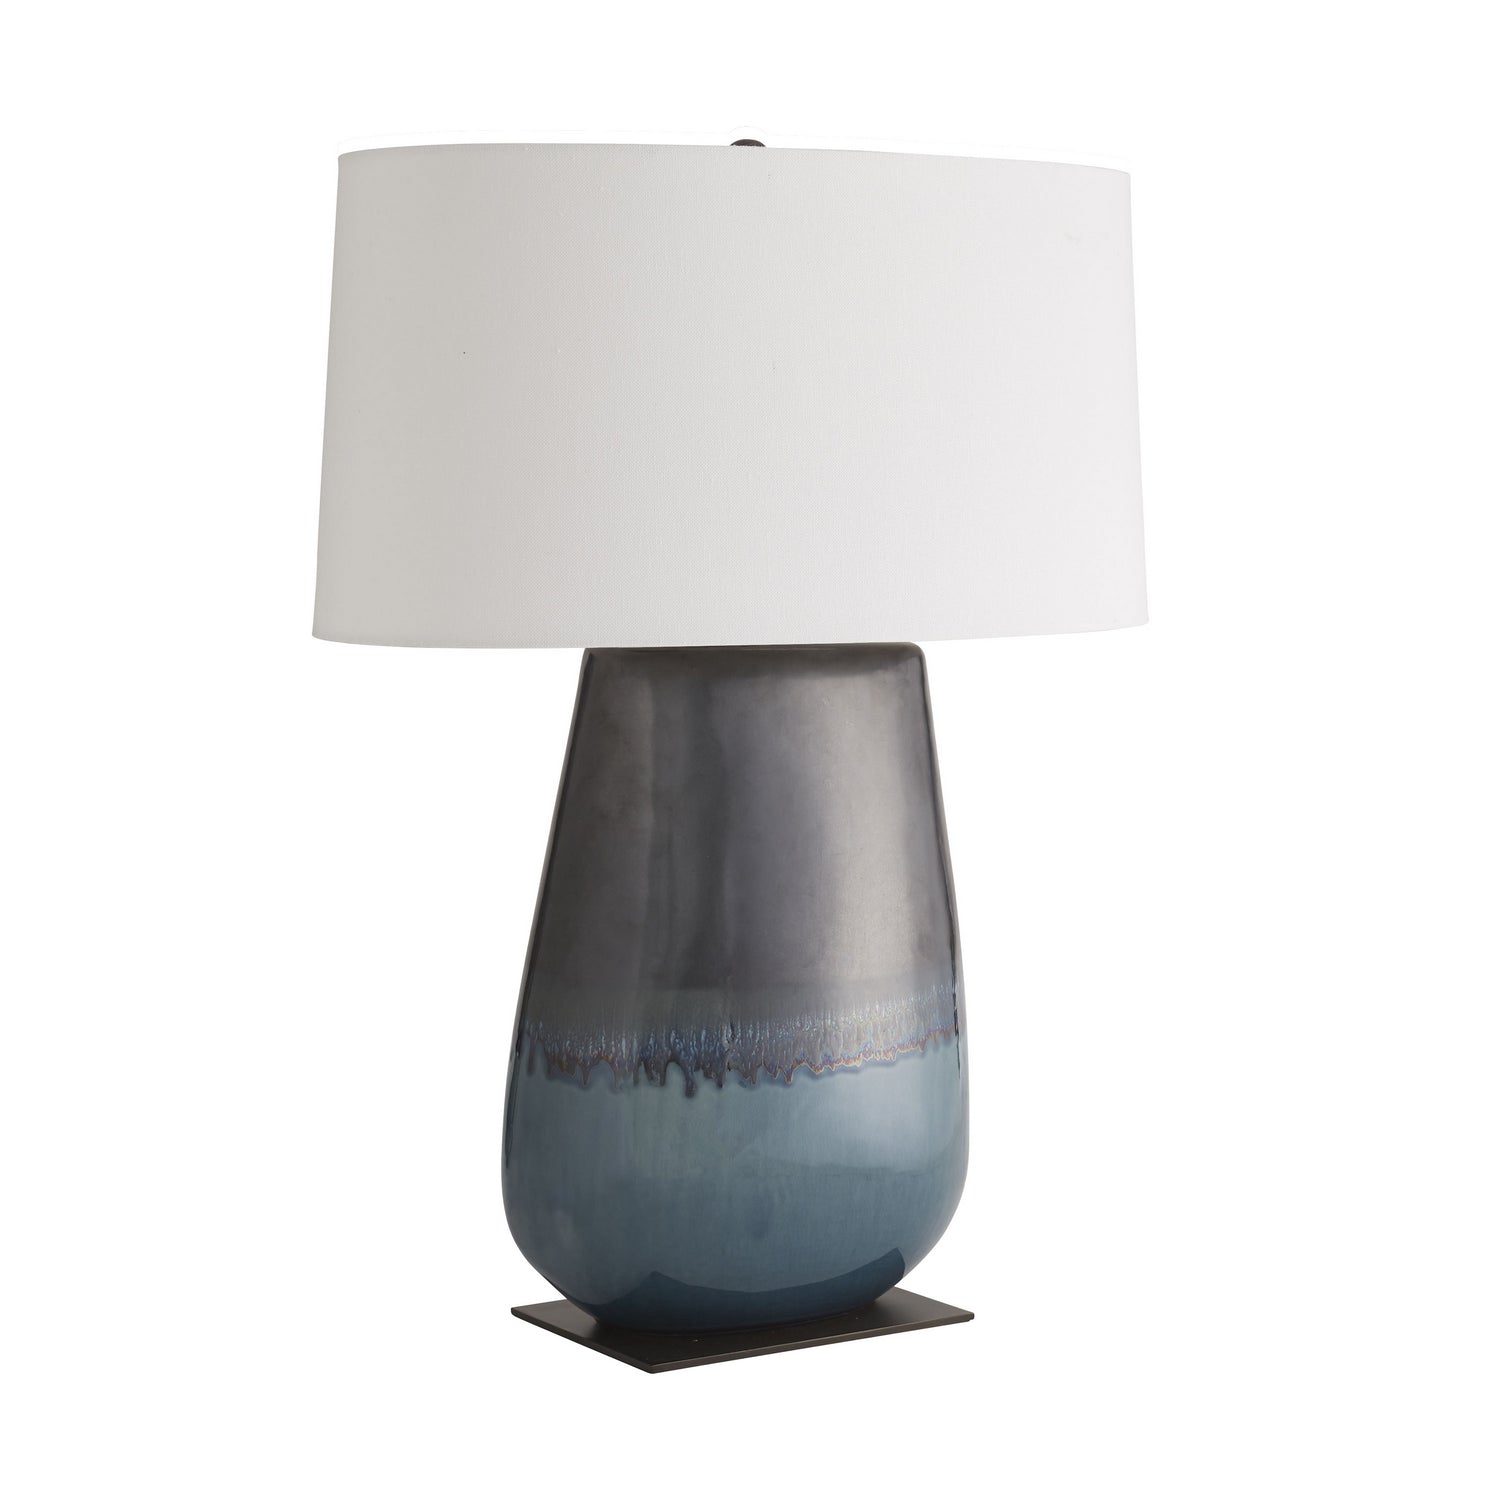 One Light Table Lamp from the Deagan collection in Gunmetal & Teal Reactive finish